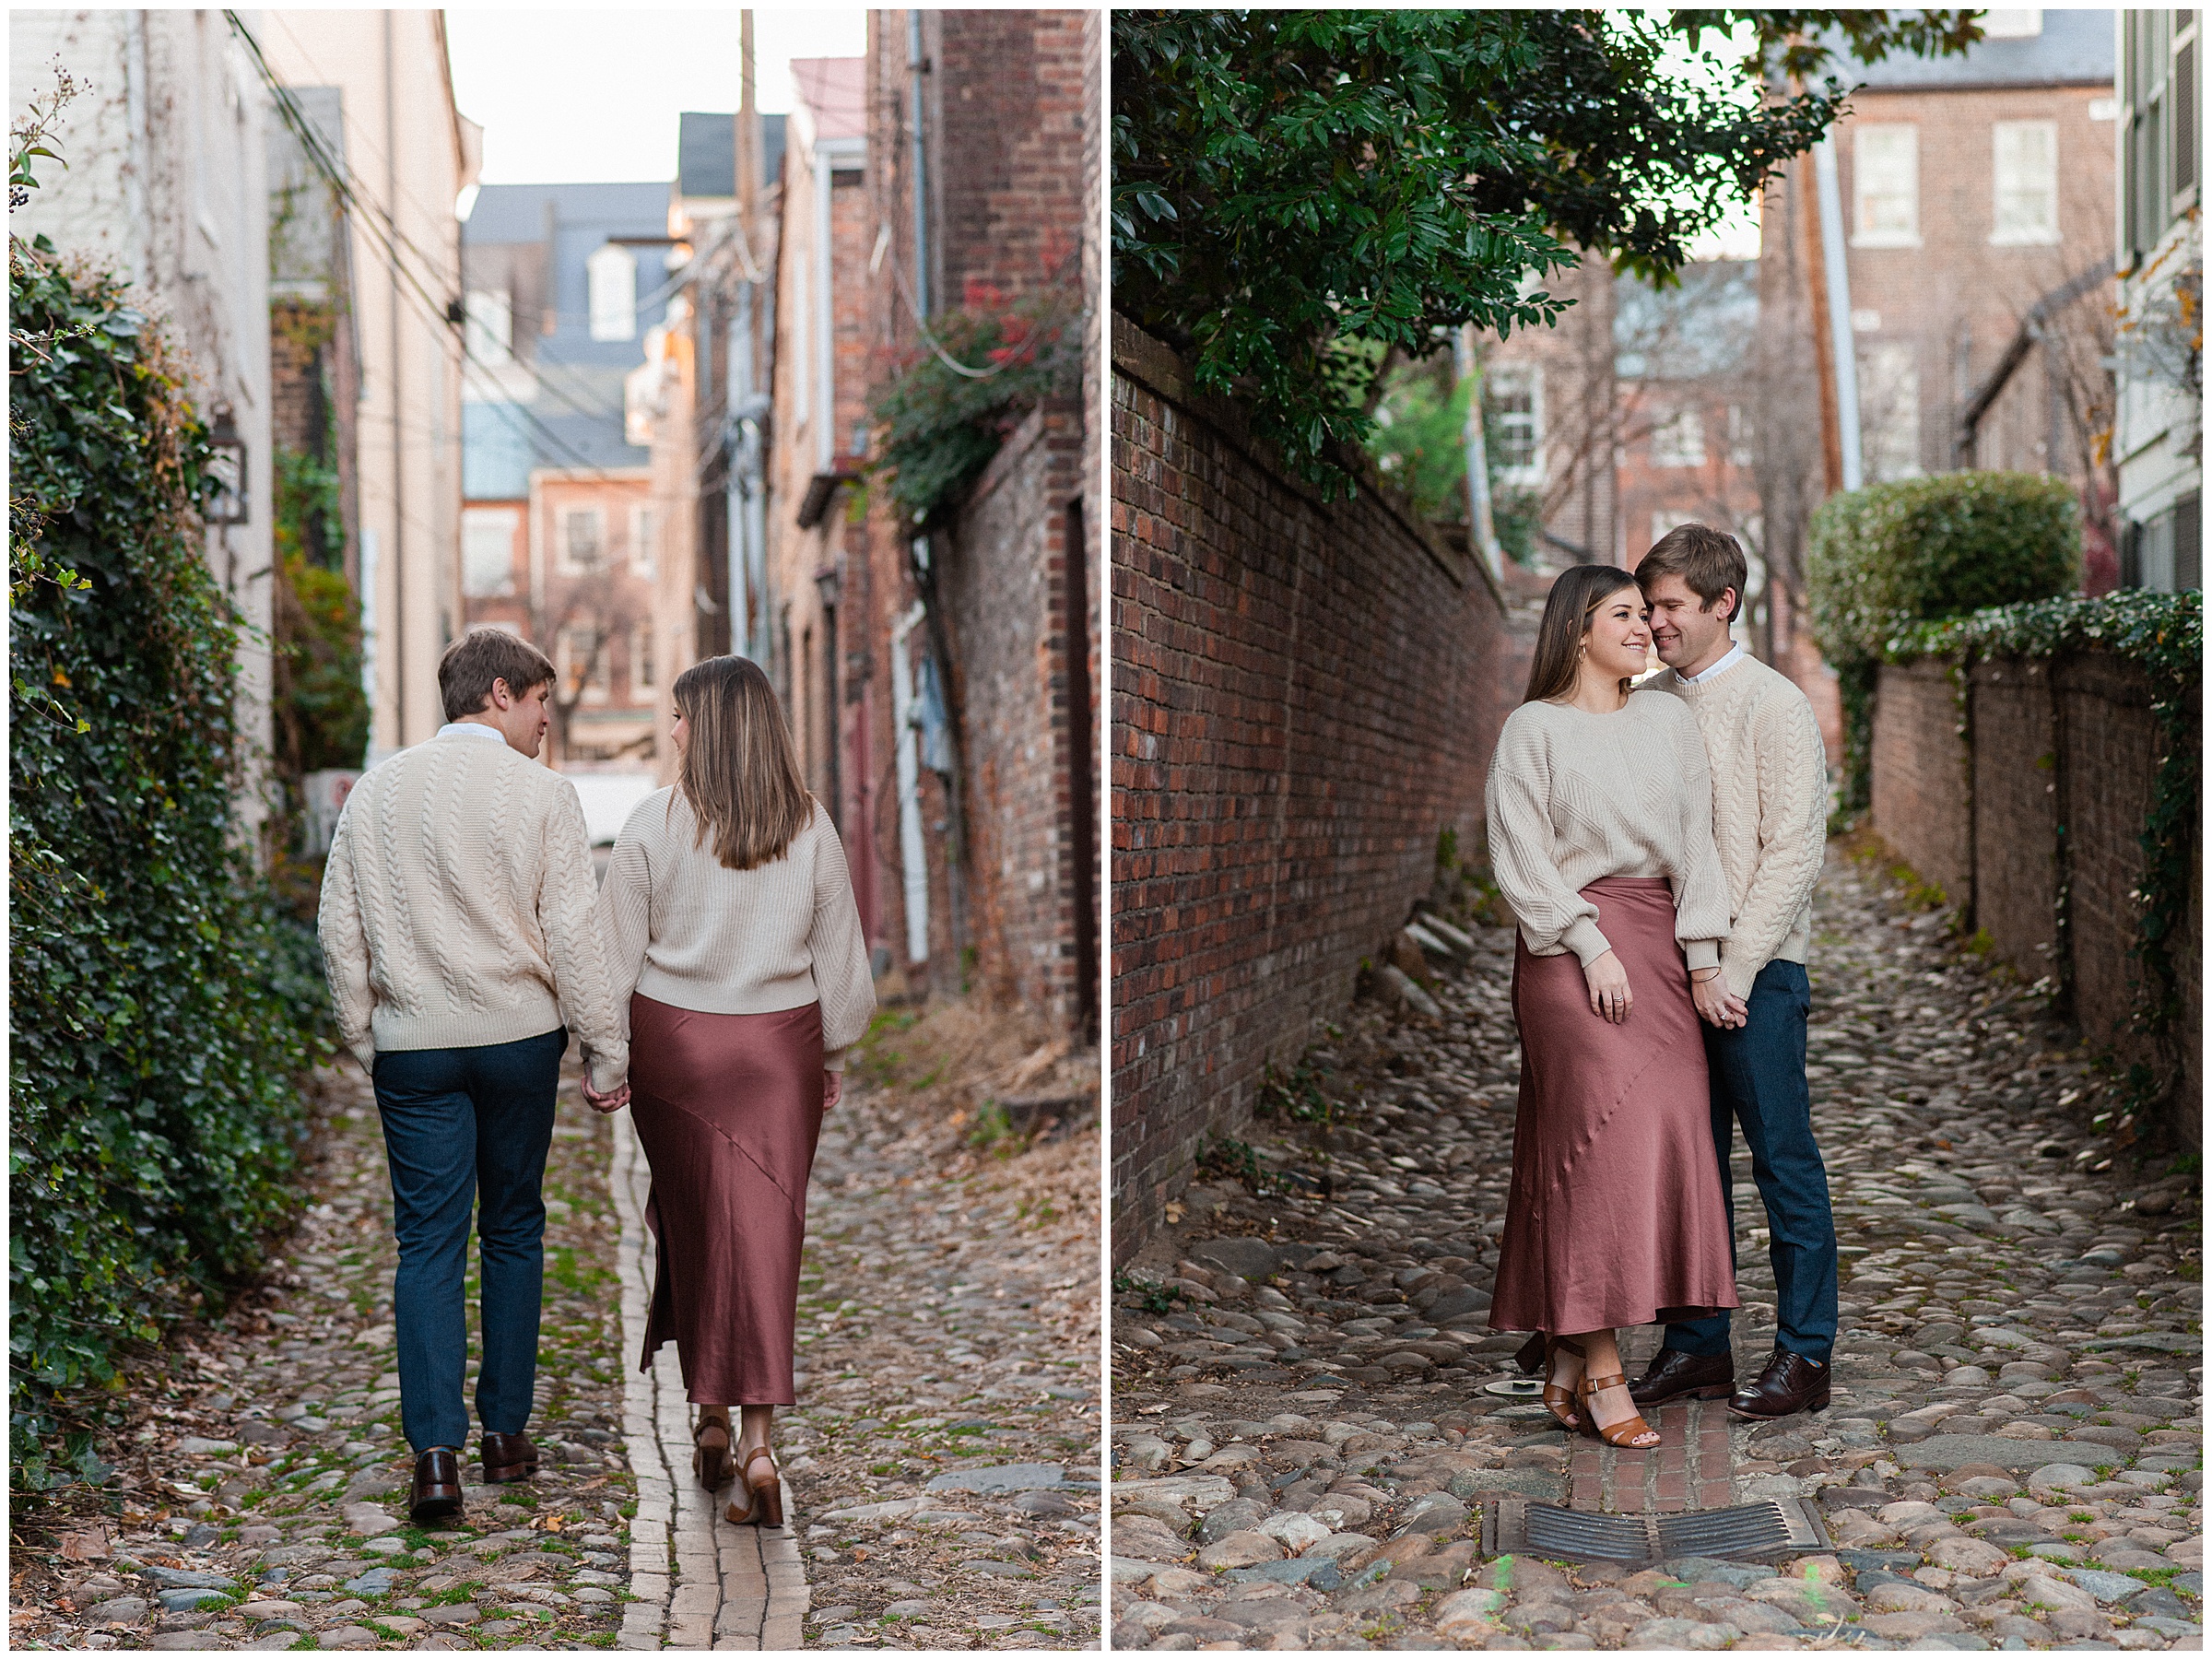 Engagement photos in Old Town Alexandria alleys